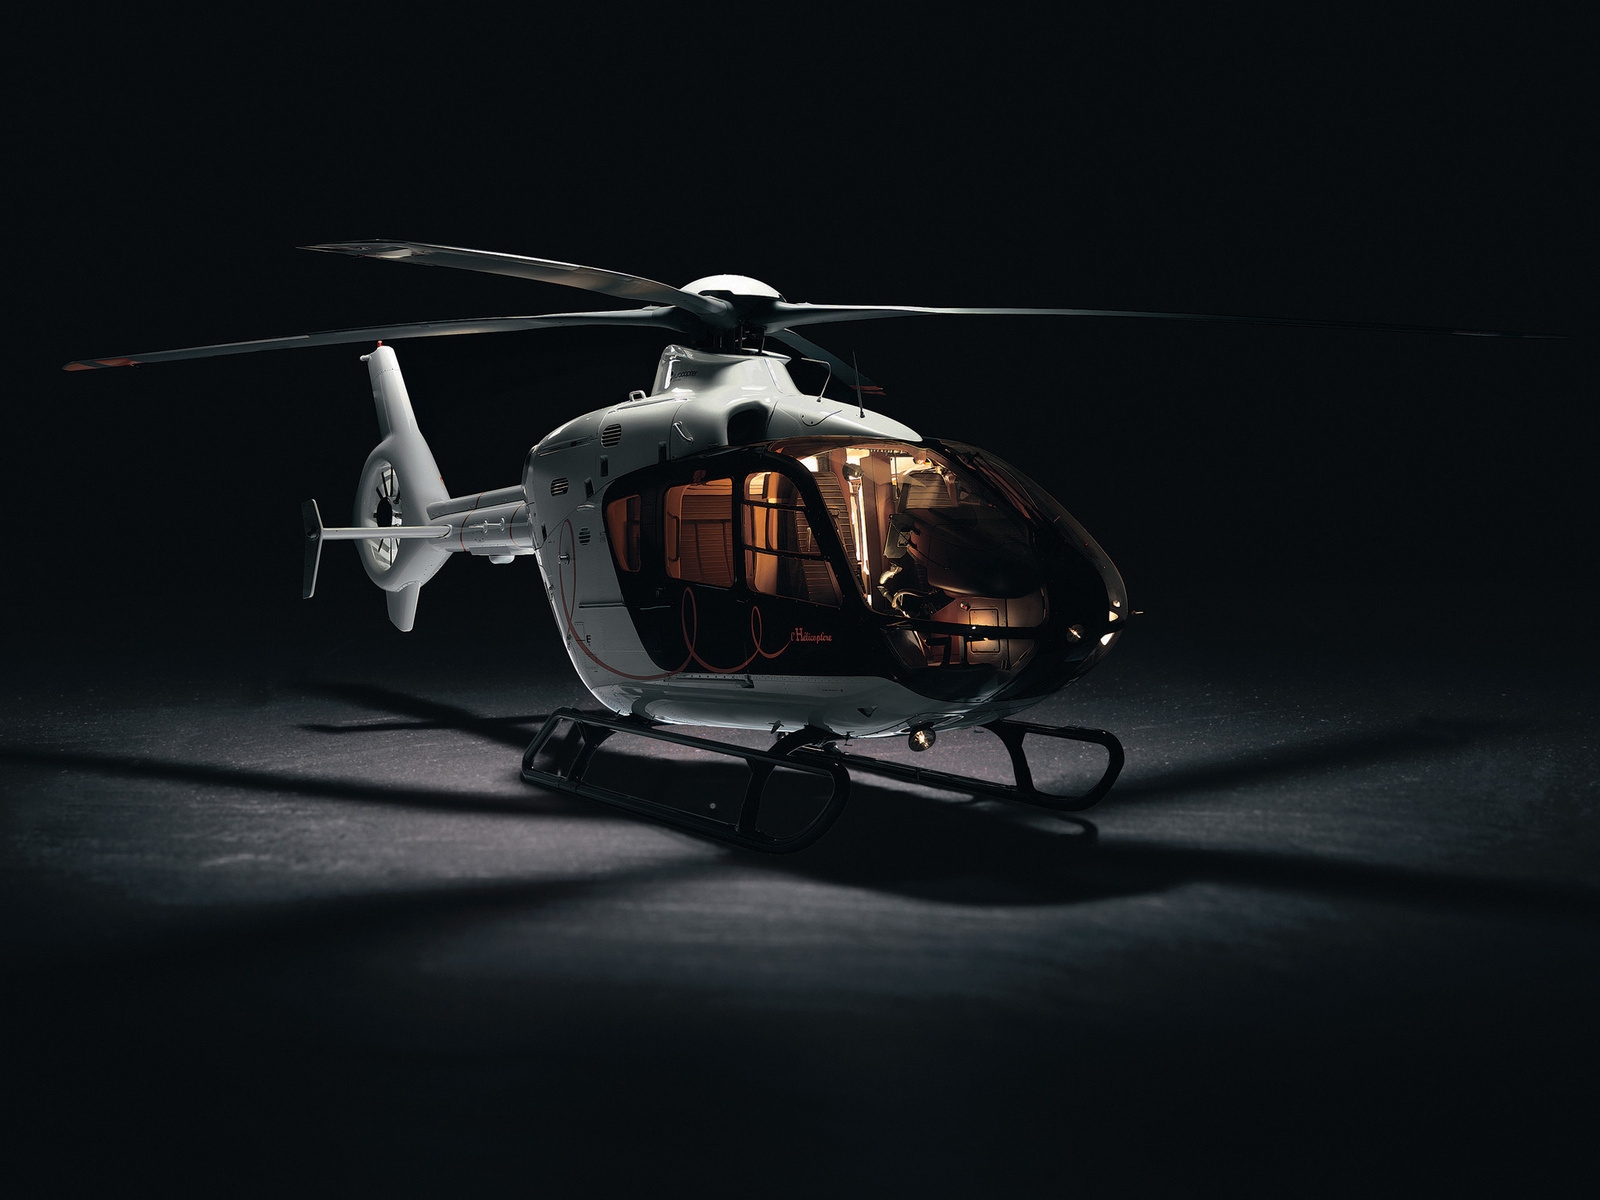 Eurocopter EC135 Helicopter for 1600 x 1200 resolution